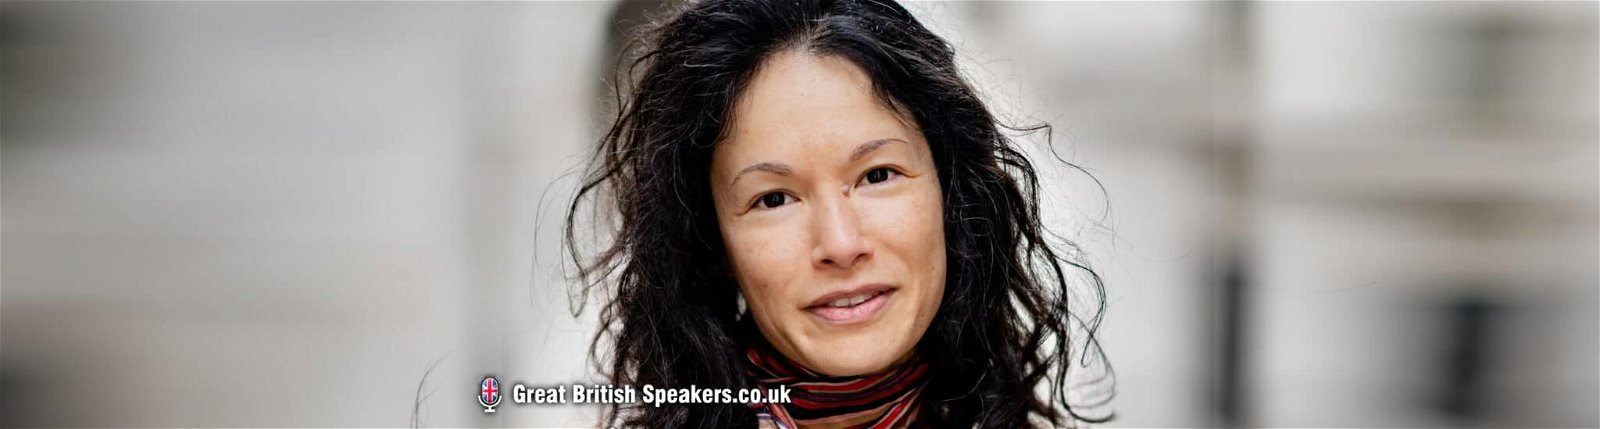 Anis Qizilbash mindful sales and workplace stress selling keynote motivational speaker at Great British Speakers